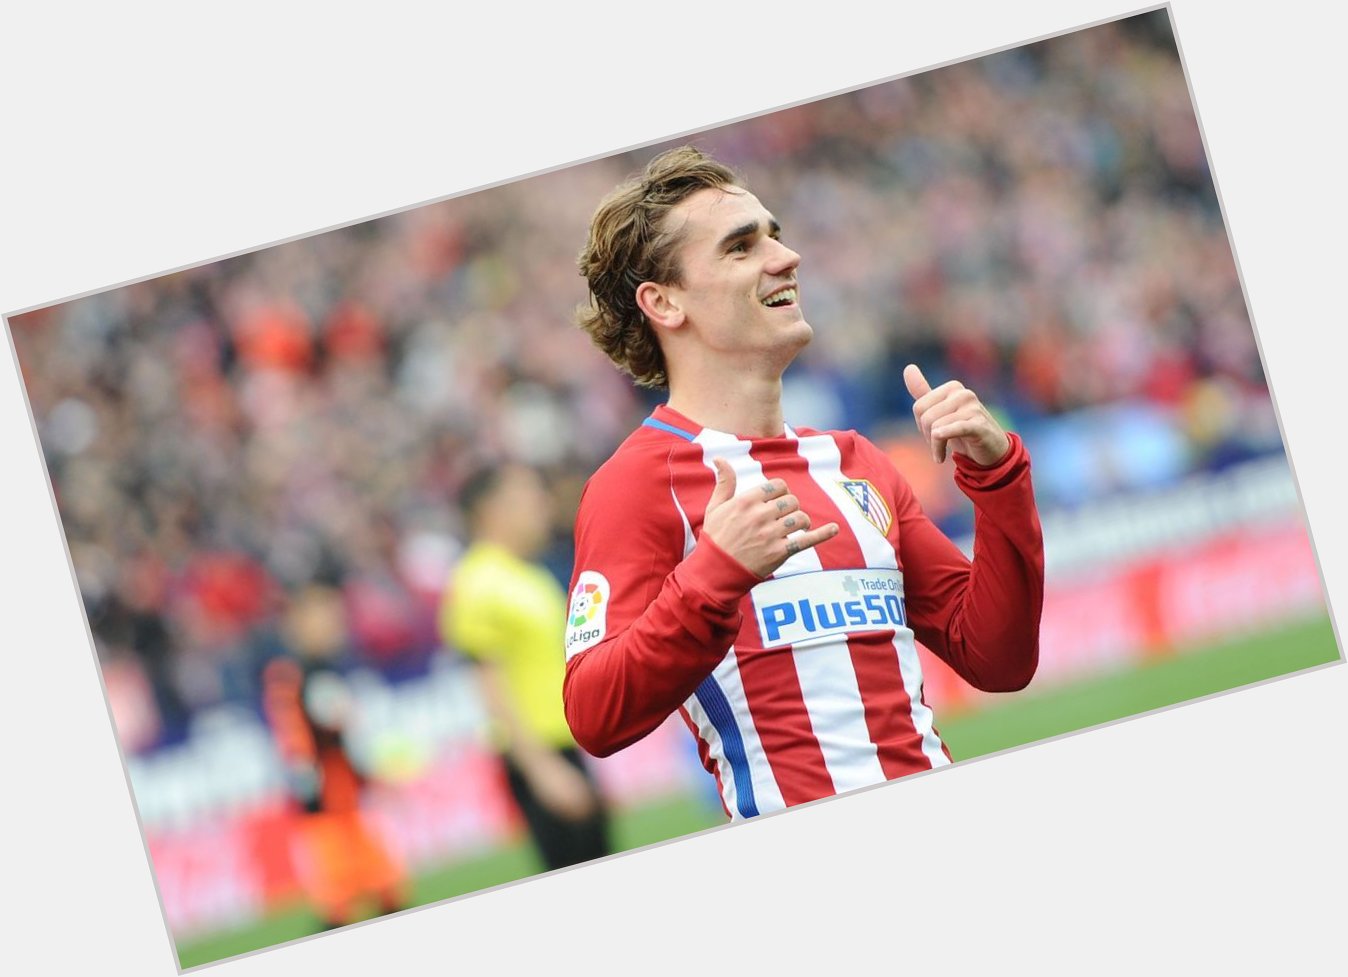 Happy birthday to Antoine Griezmann. The sought-after Atlético Madrid striker turns 26 today. 